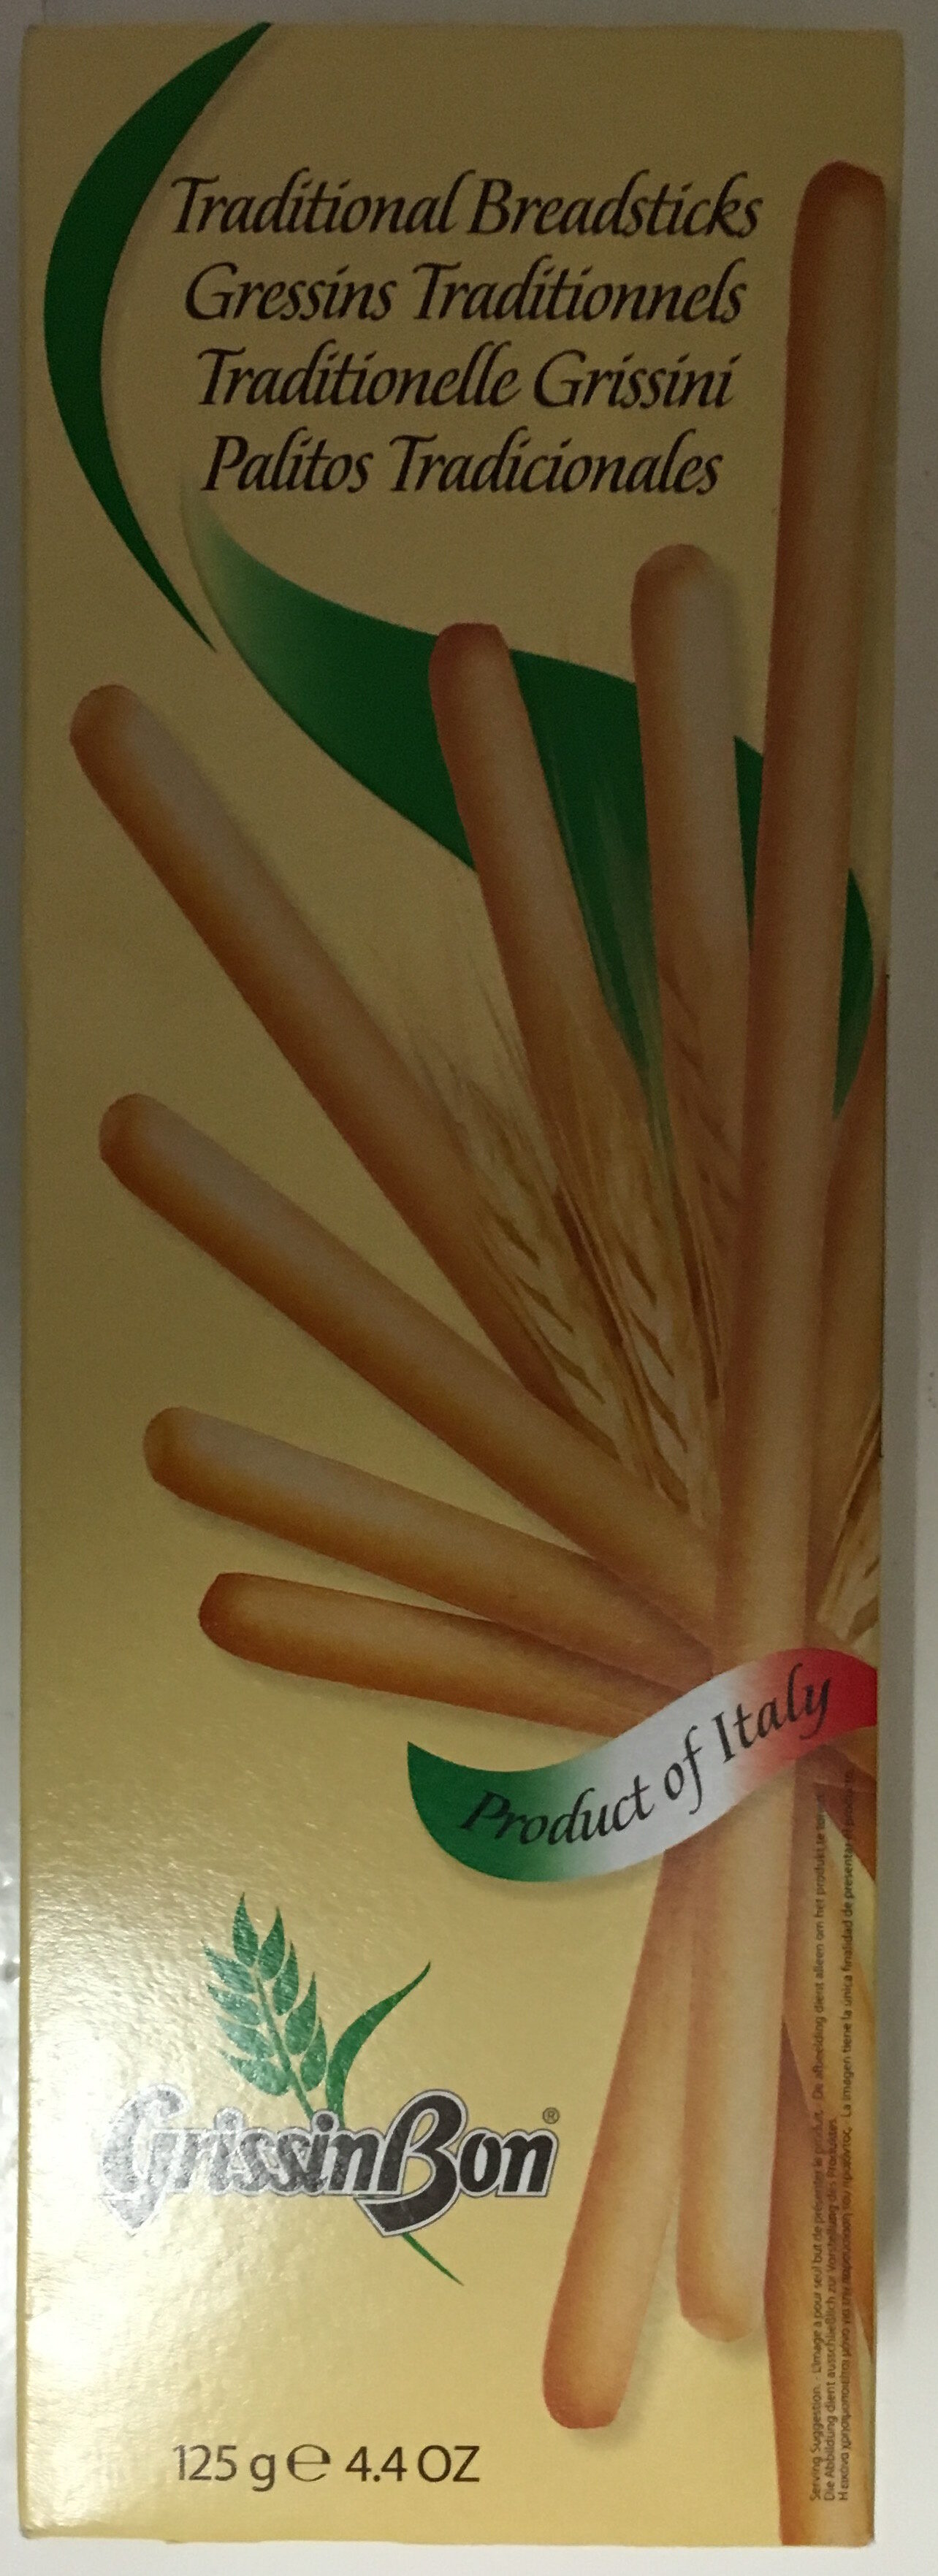 Traditional breadsticks - Product